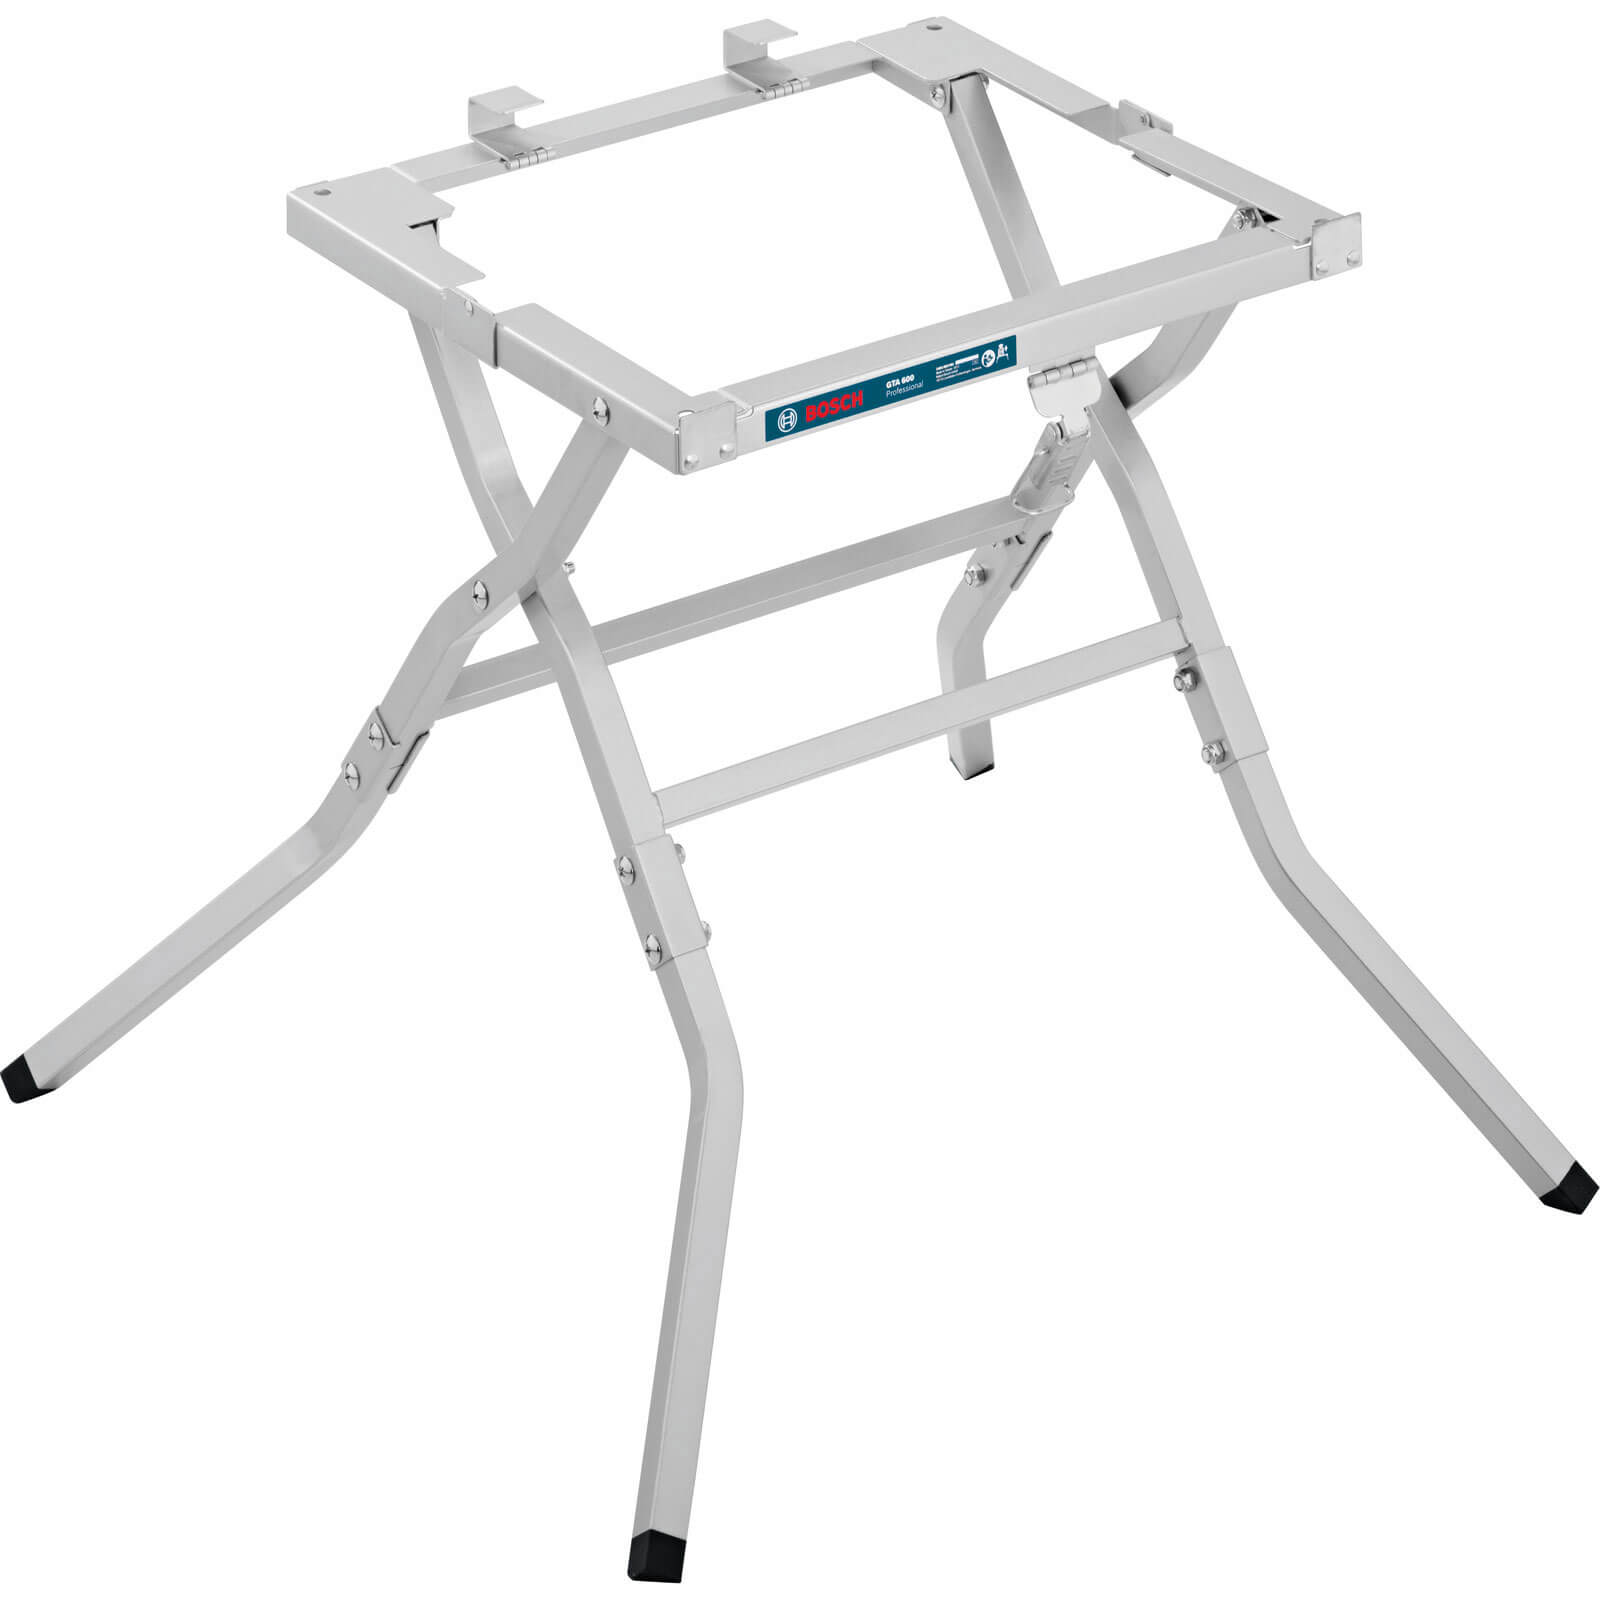 Bosch GTA 600 Stand for GTS 10 J Table Saws